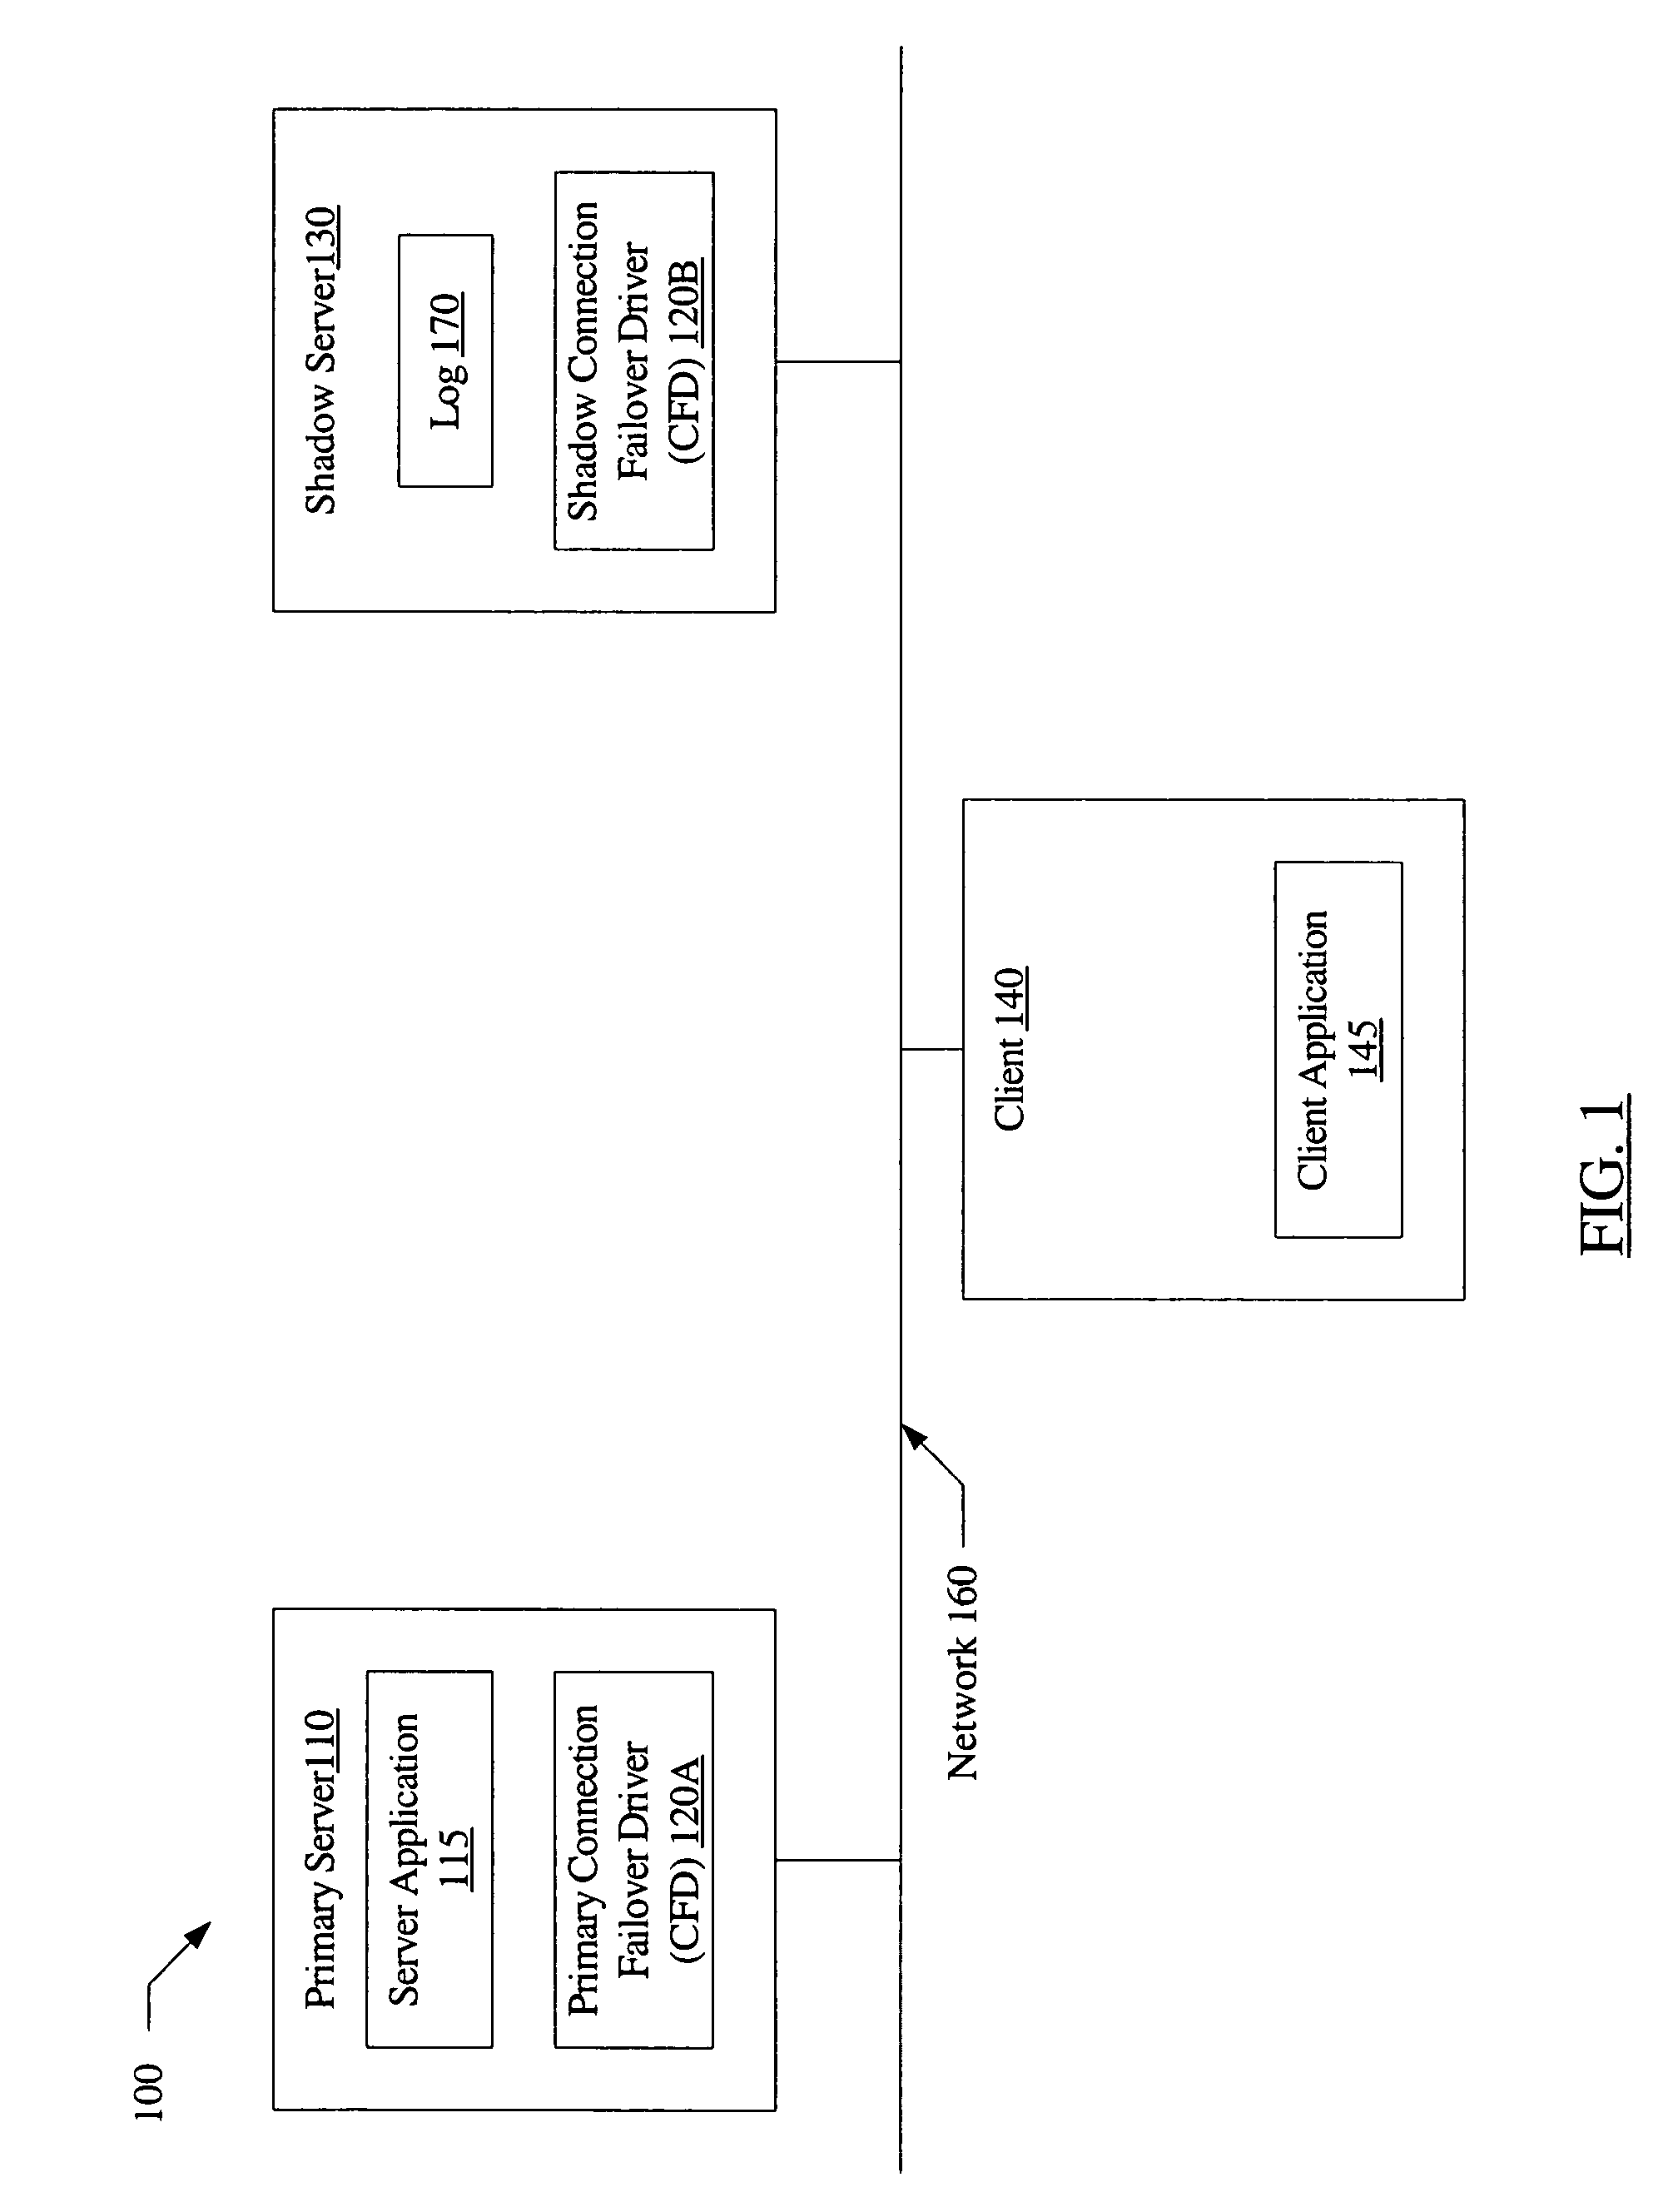 System and method for connection failover using redirection